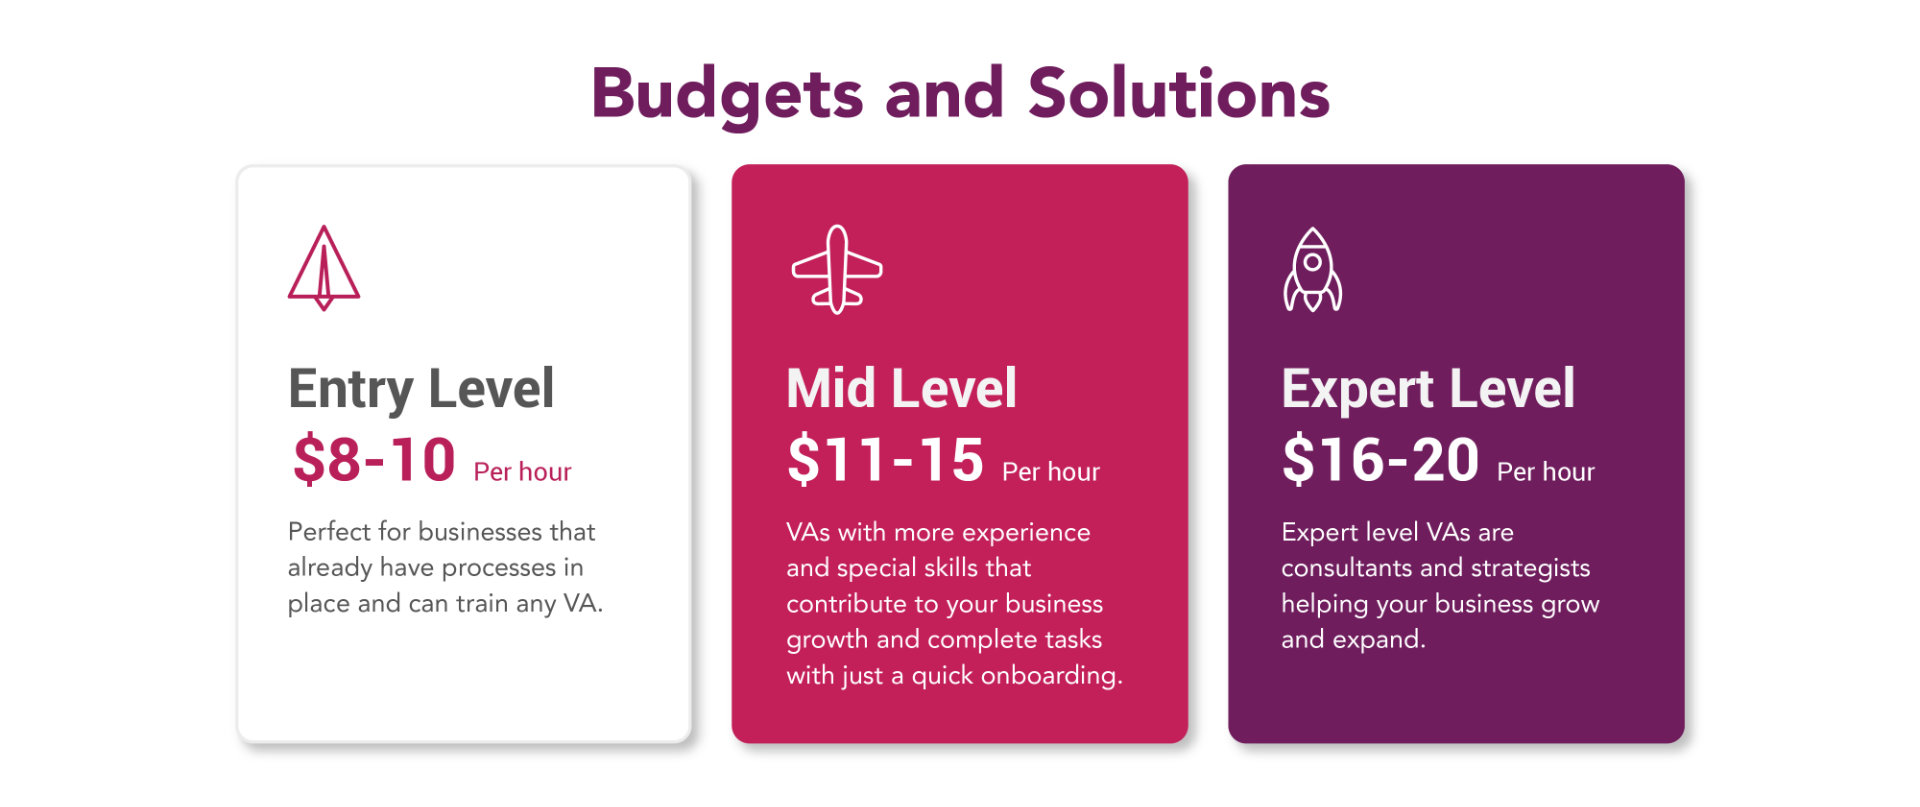 Budgets and Solutions